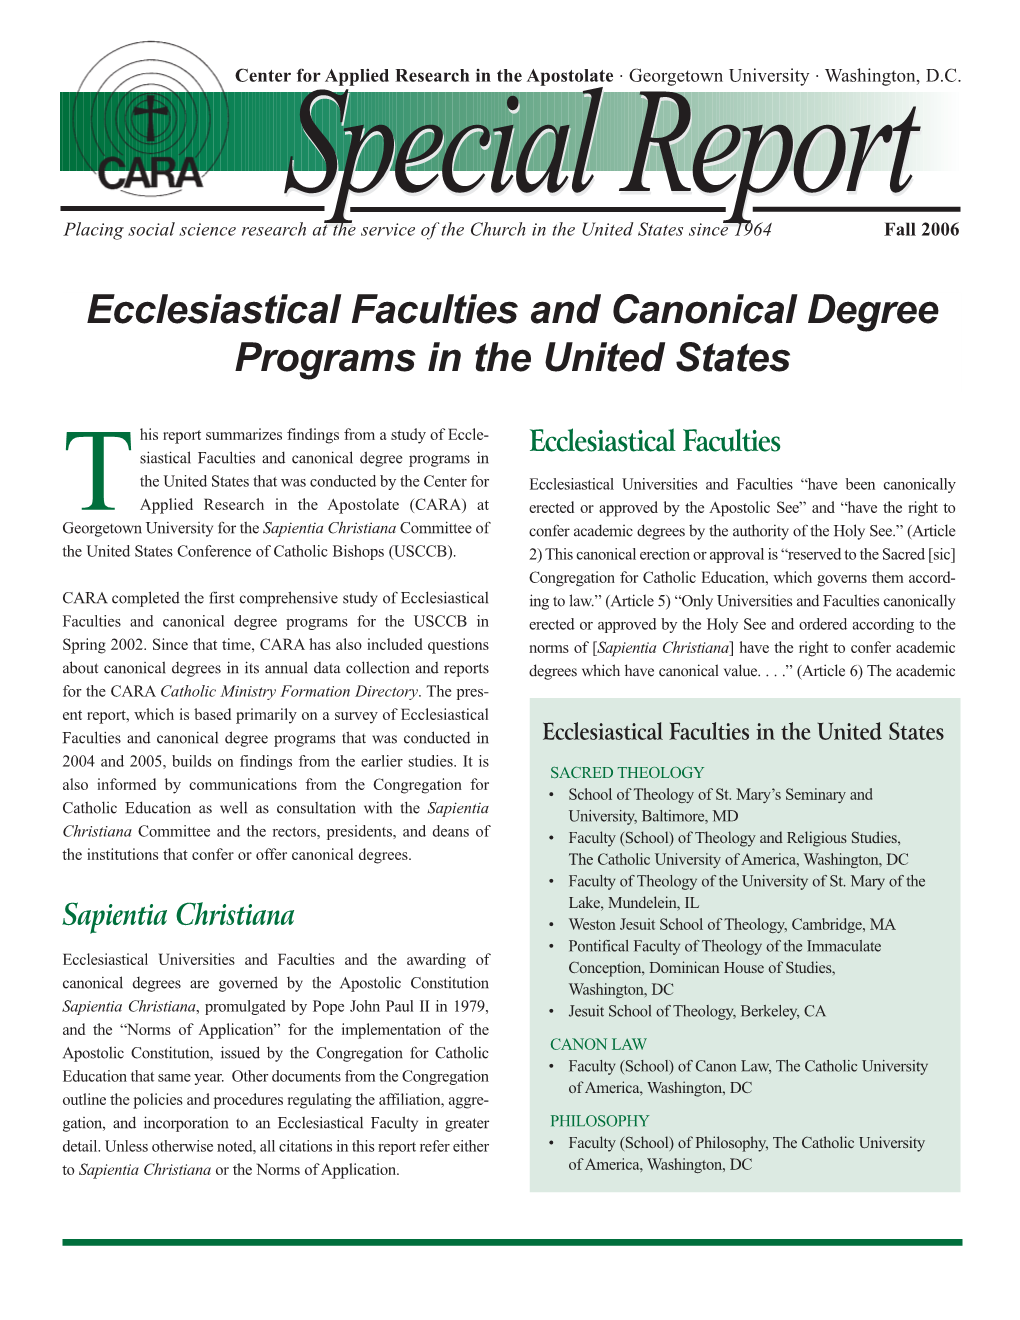 Ecclesiastical Faculties and Canonical Degree Programs in the United States